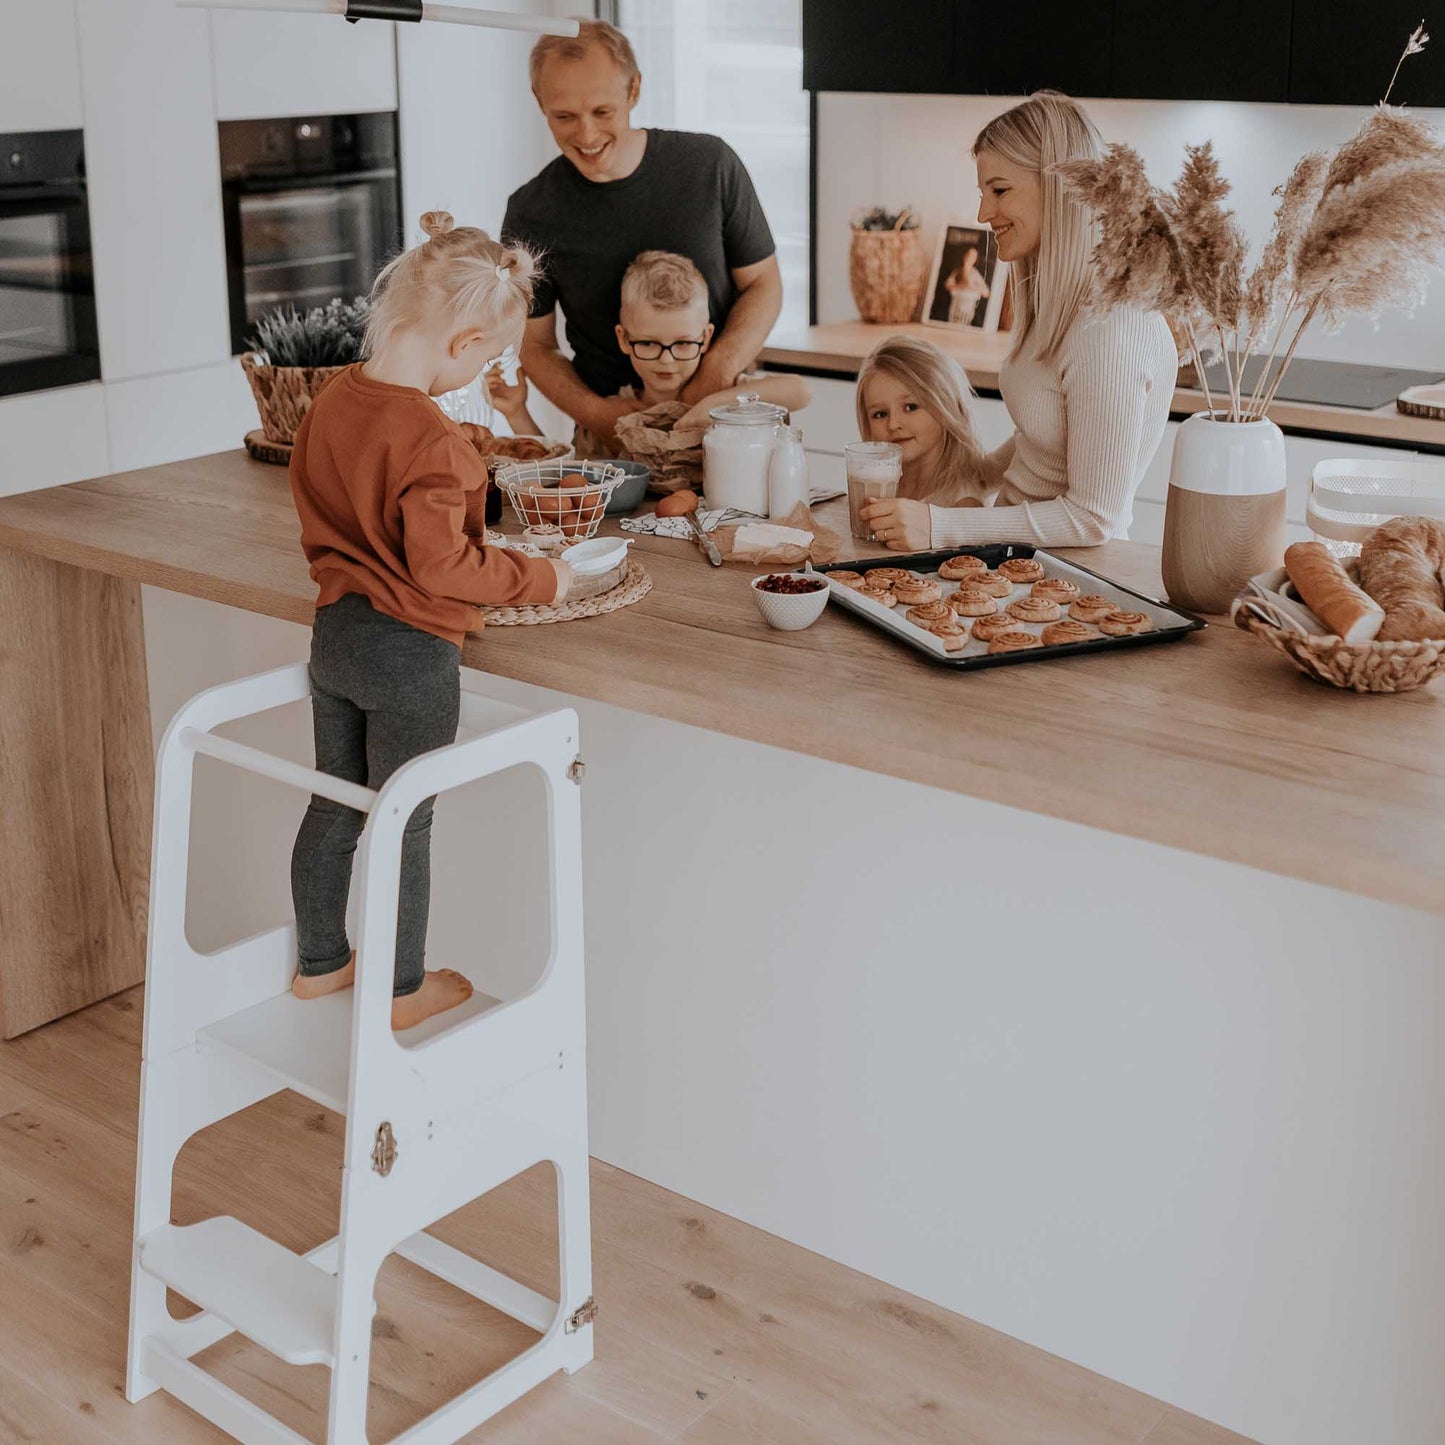 A family of kids is standing on a 2-in-1 Convertible kitchen tower - table and chair in the kitchen.